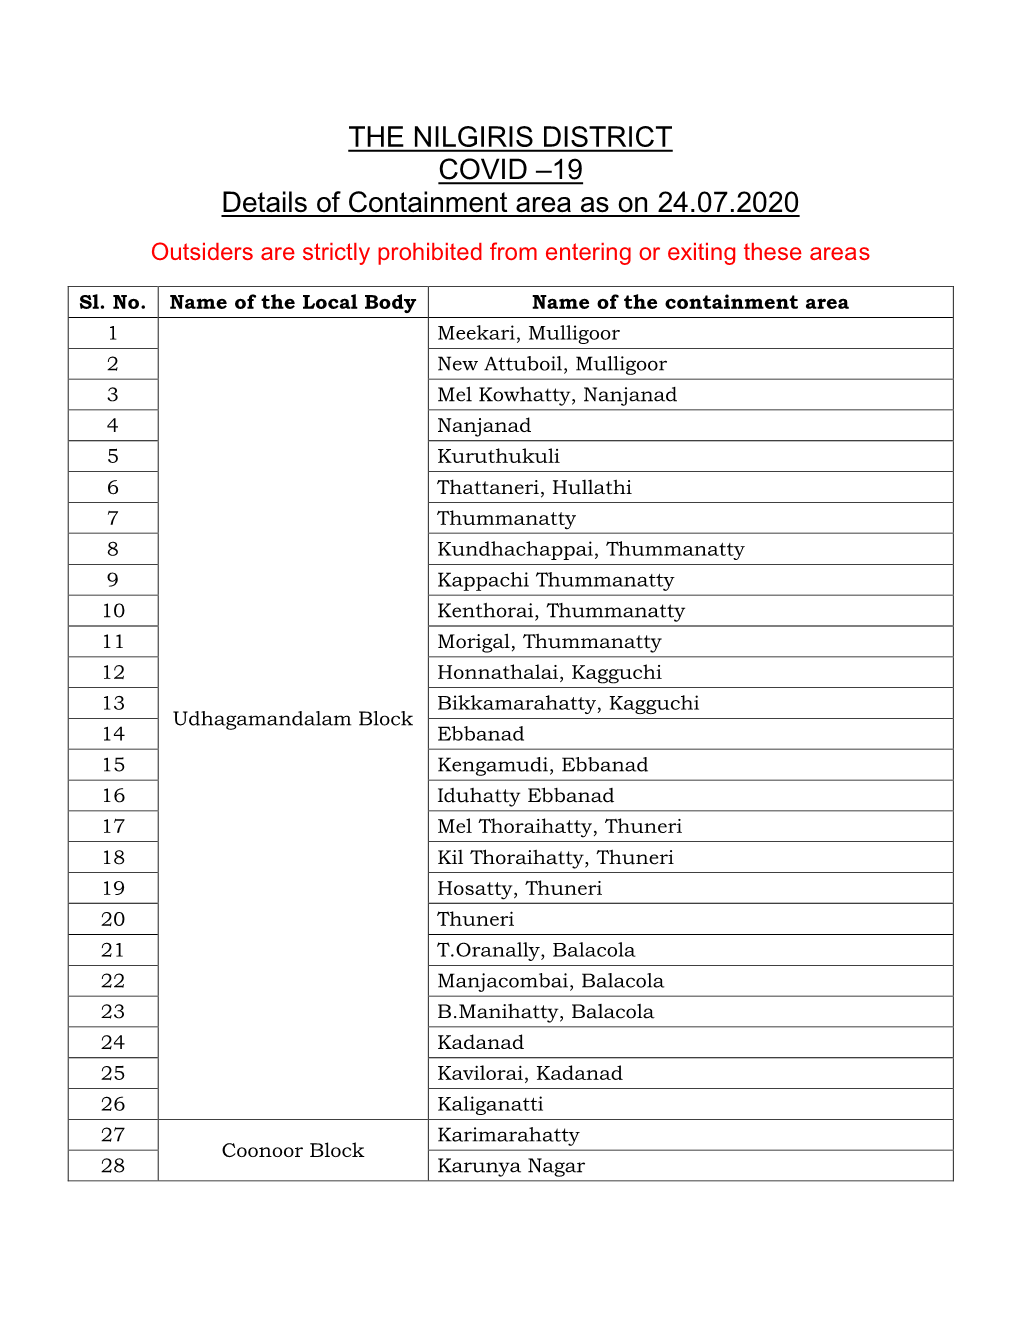 THE NILGIRIS DISTRICT COVID –19 Details of Containment Area As on 24.07.2020